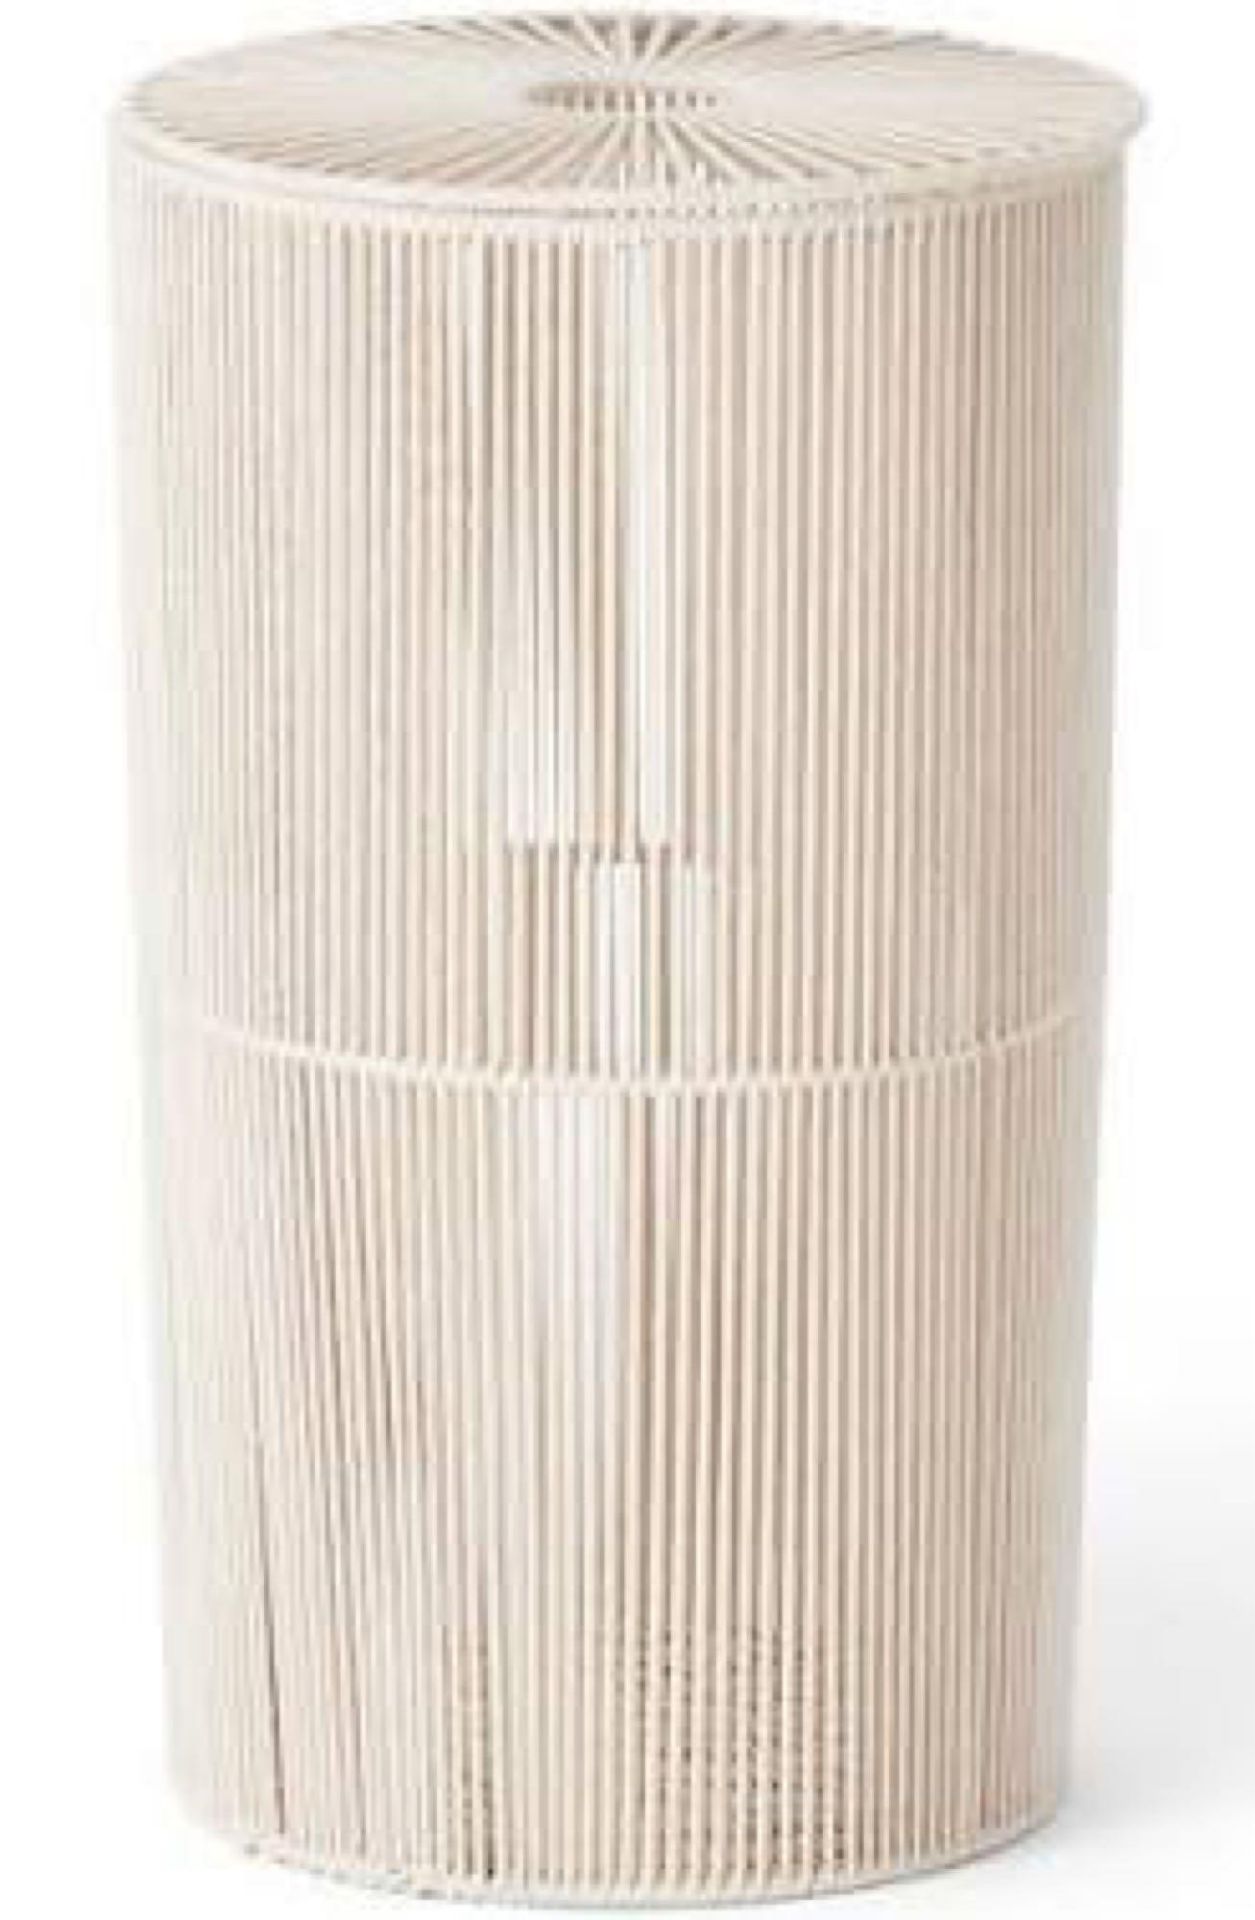 RRP £50 To Contain Kia Rounded Square Pedal Bin - Image 2 of 2